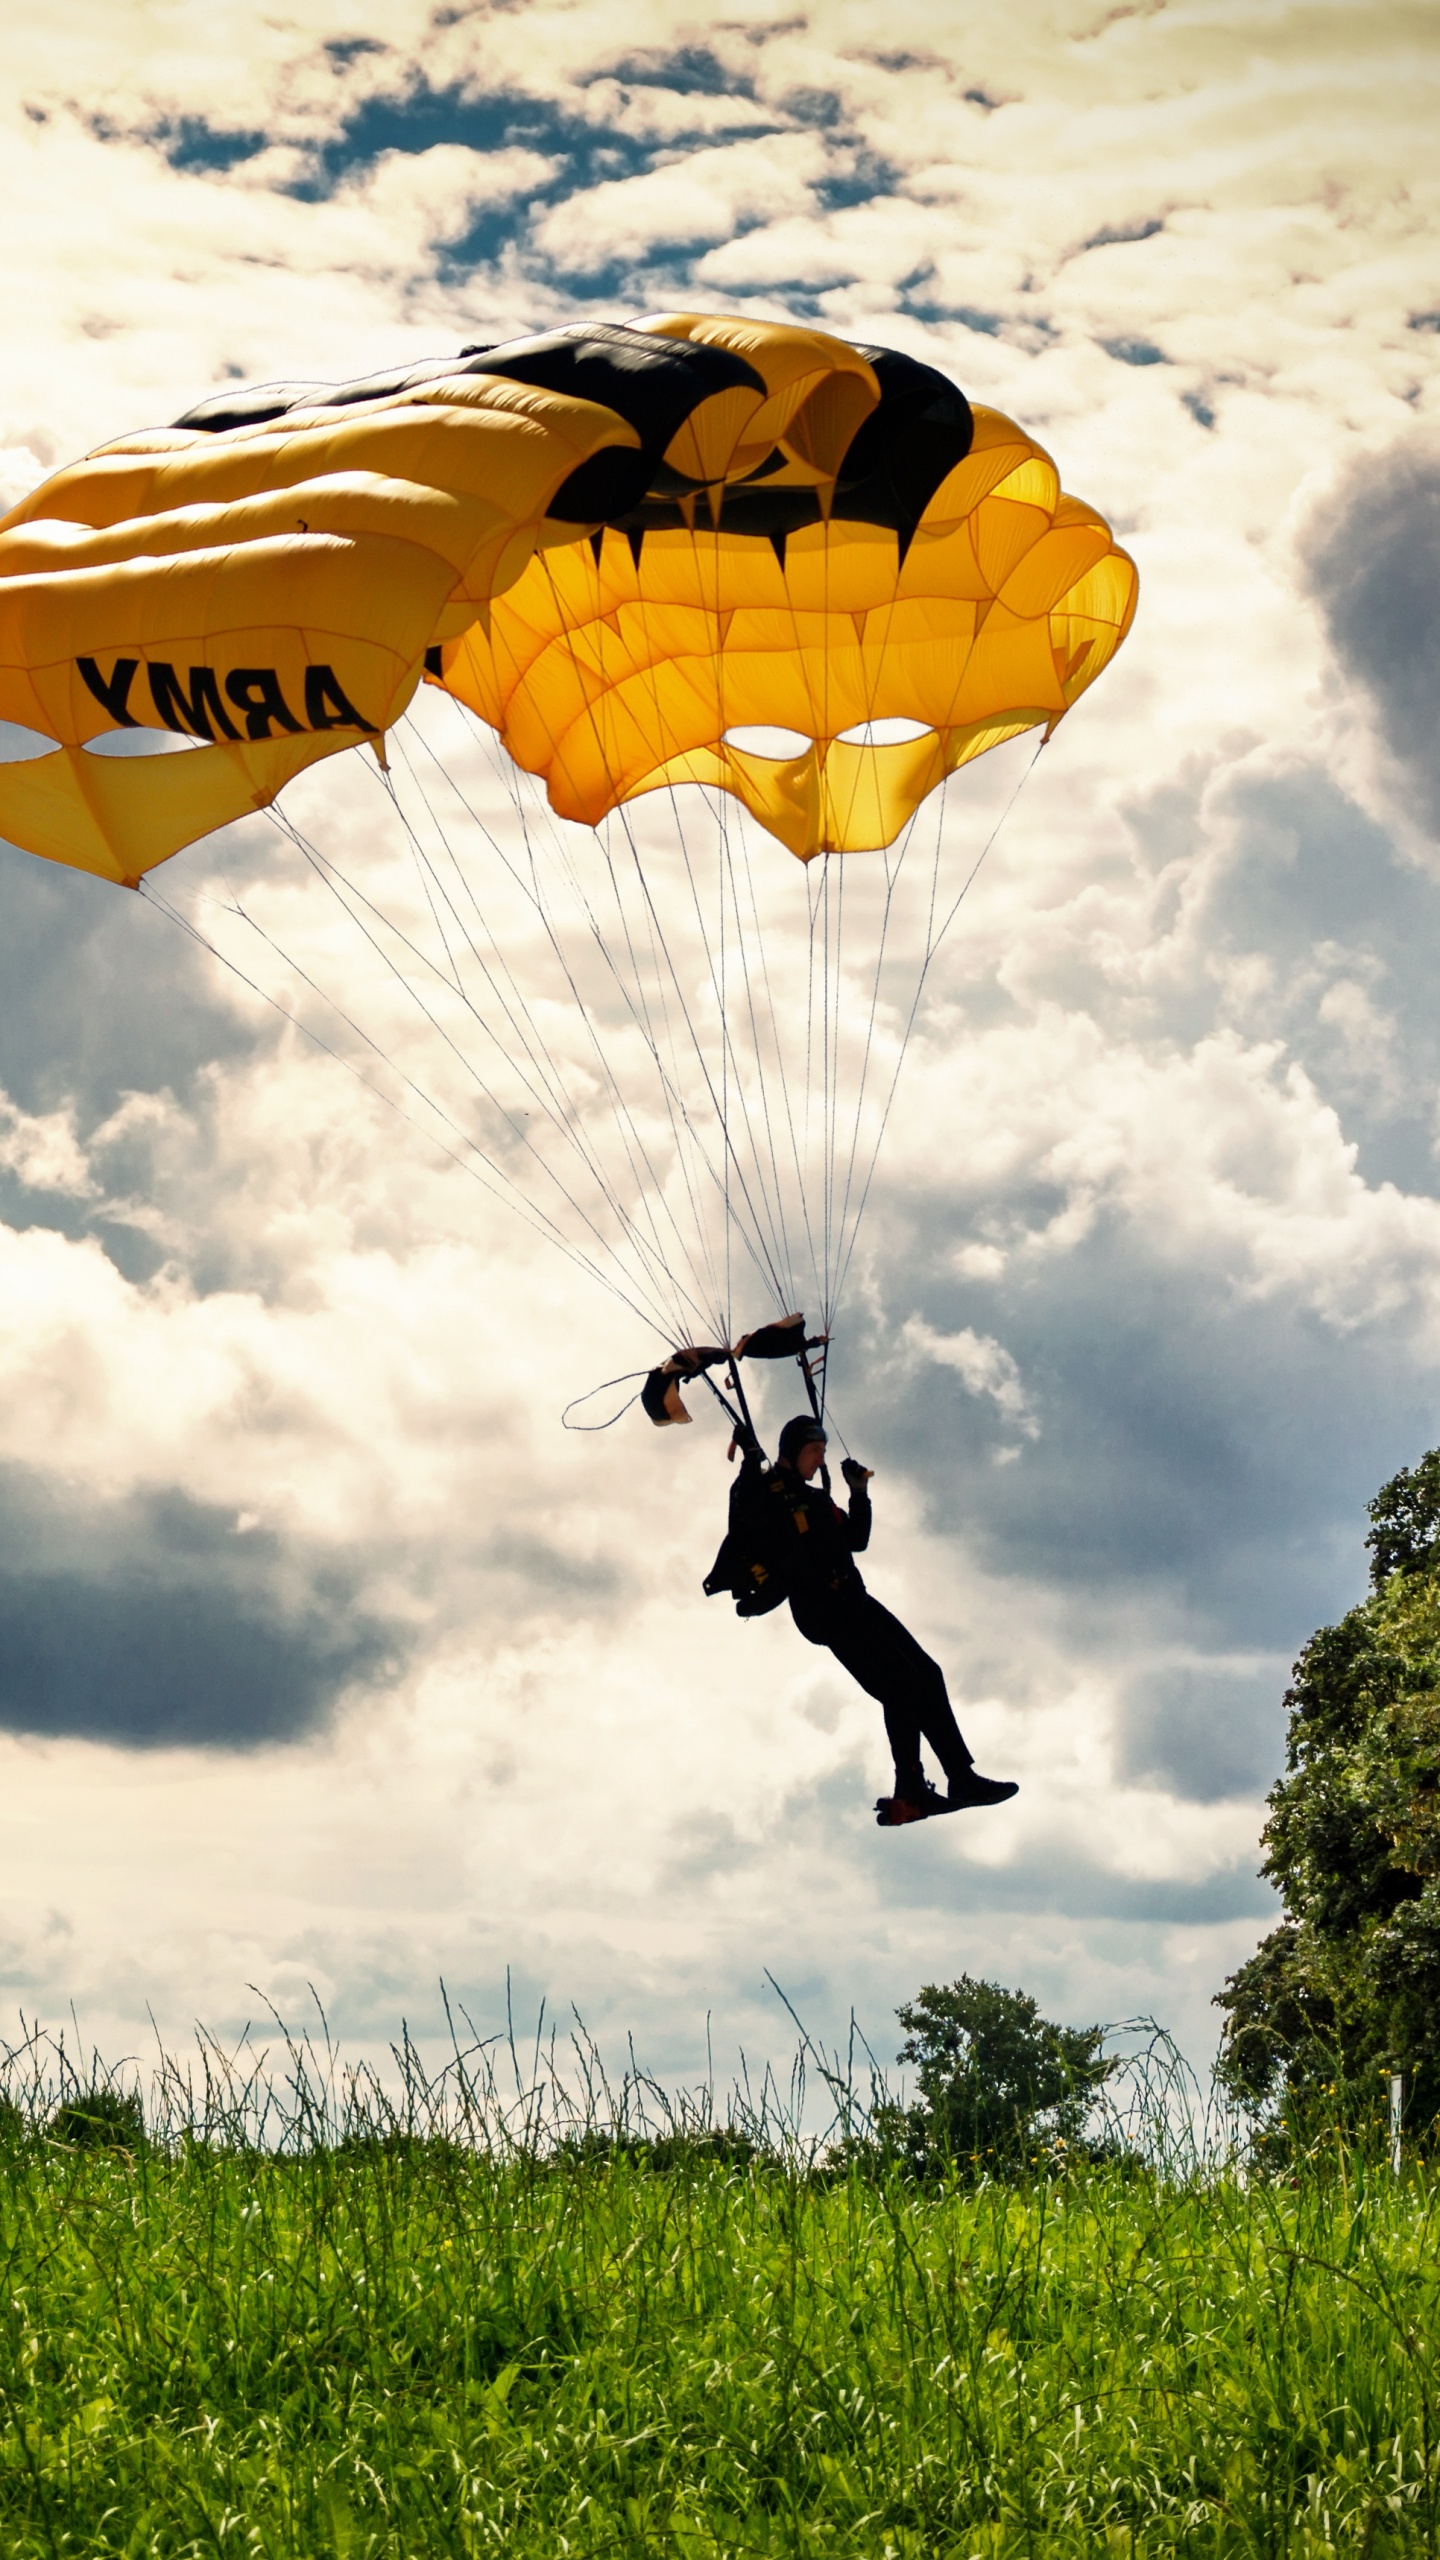 Person in Black Jacket and Pants Riding Yellow Parachute Under White Clouds During Daytime. Wallpaper in 1440x2560 Resolution